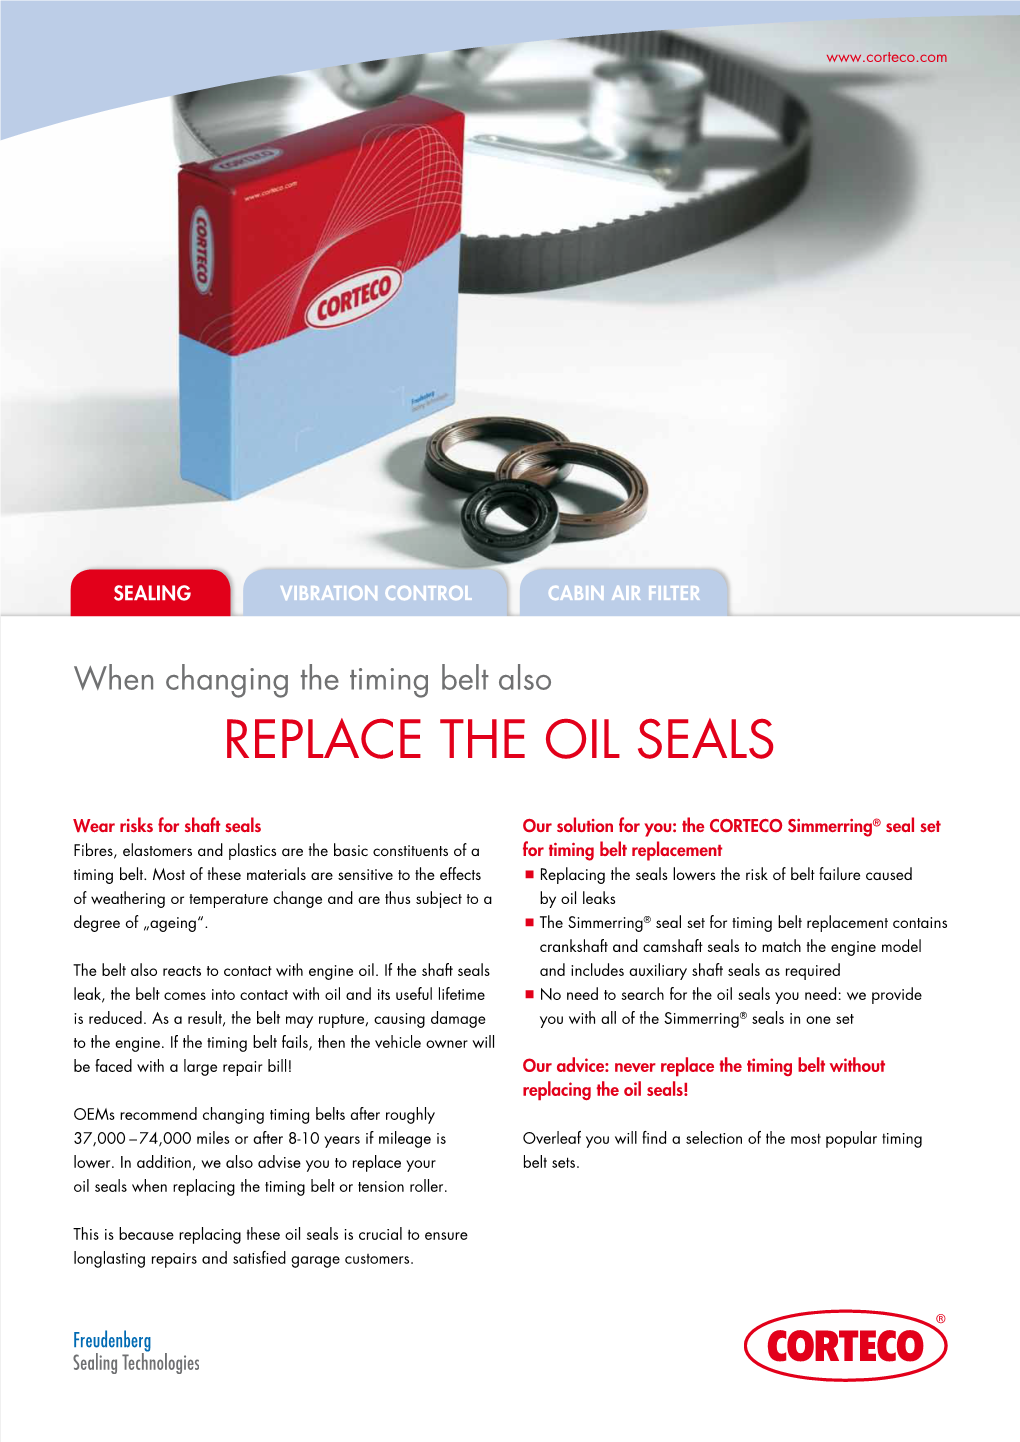 Replace the Oil Seals